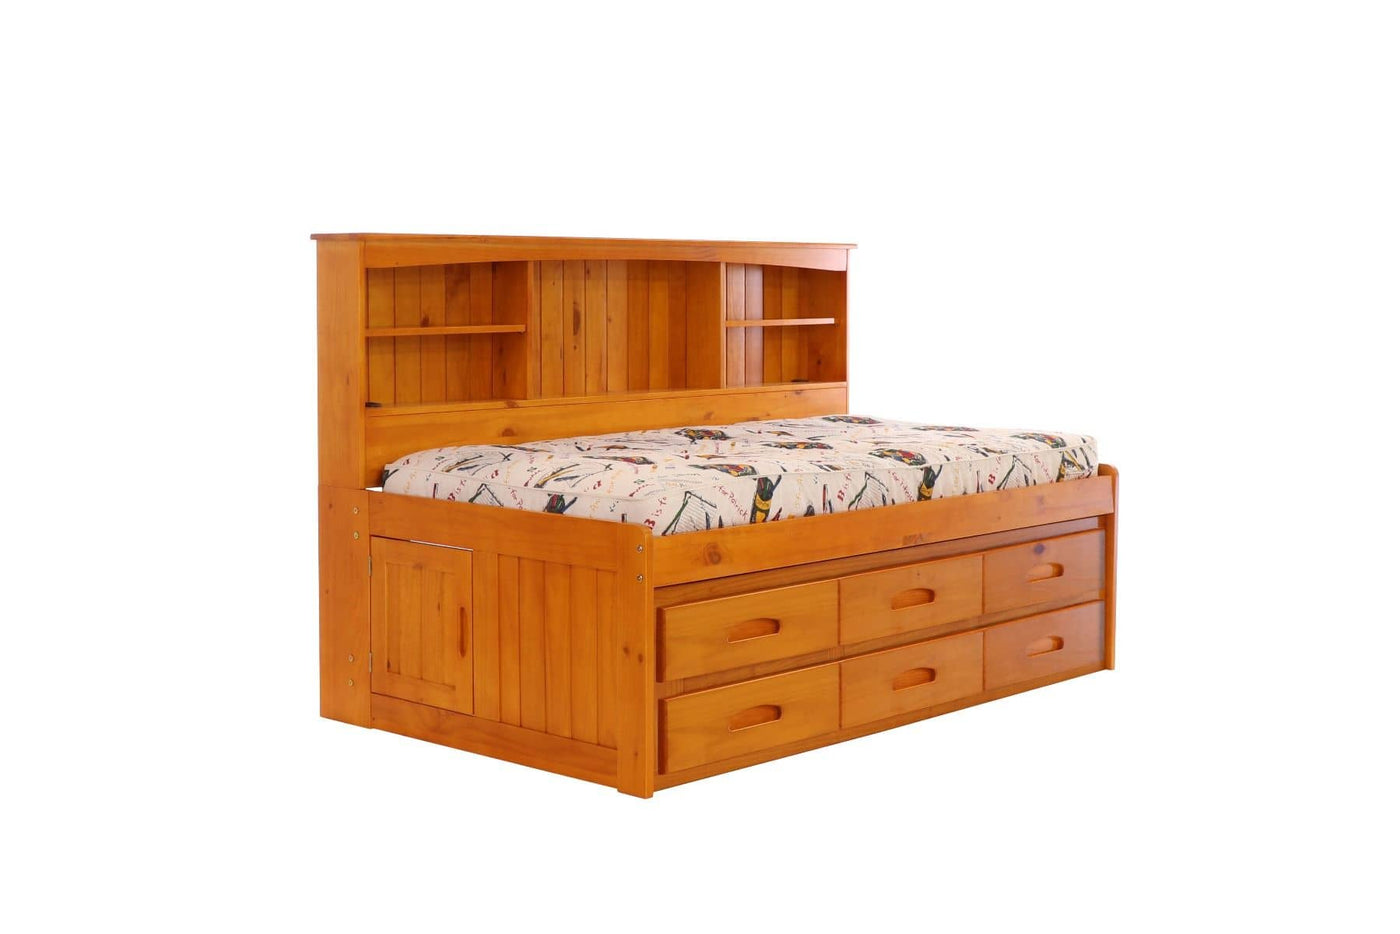 DISCOVERY WORLD FURNITURE HONEY TWIN SIZE BOOKCASE DAY BED Custom Kids Furniture